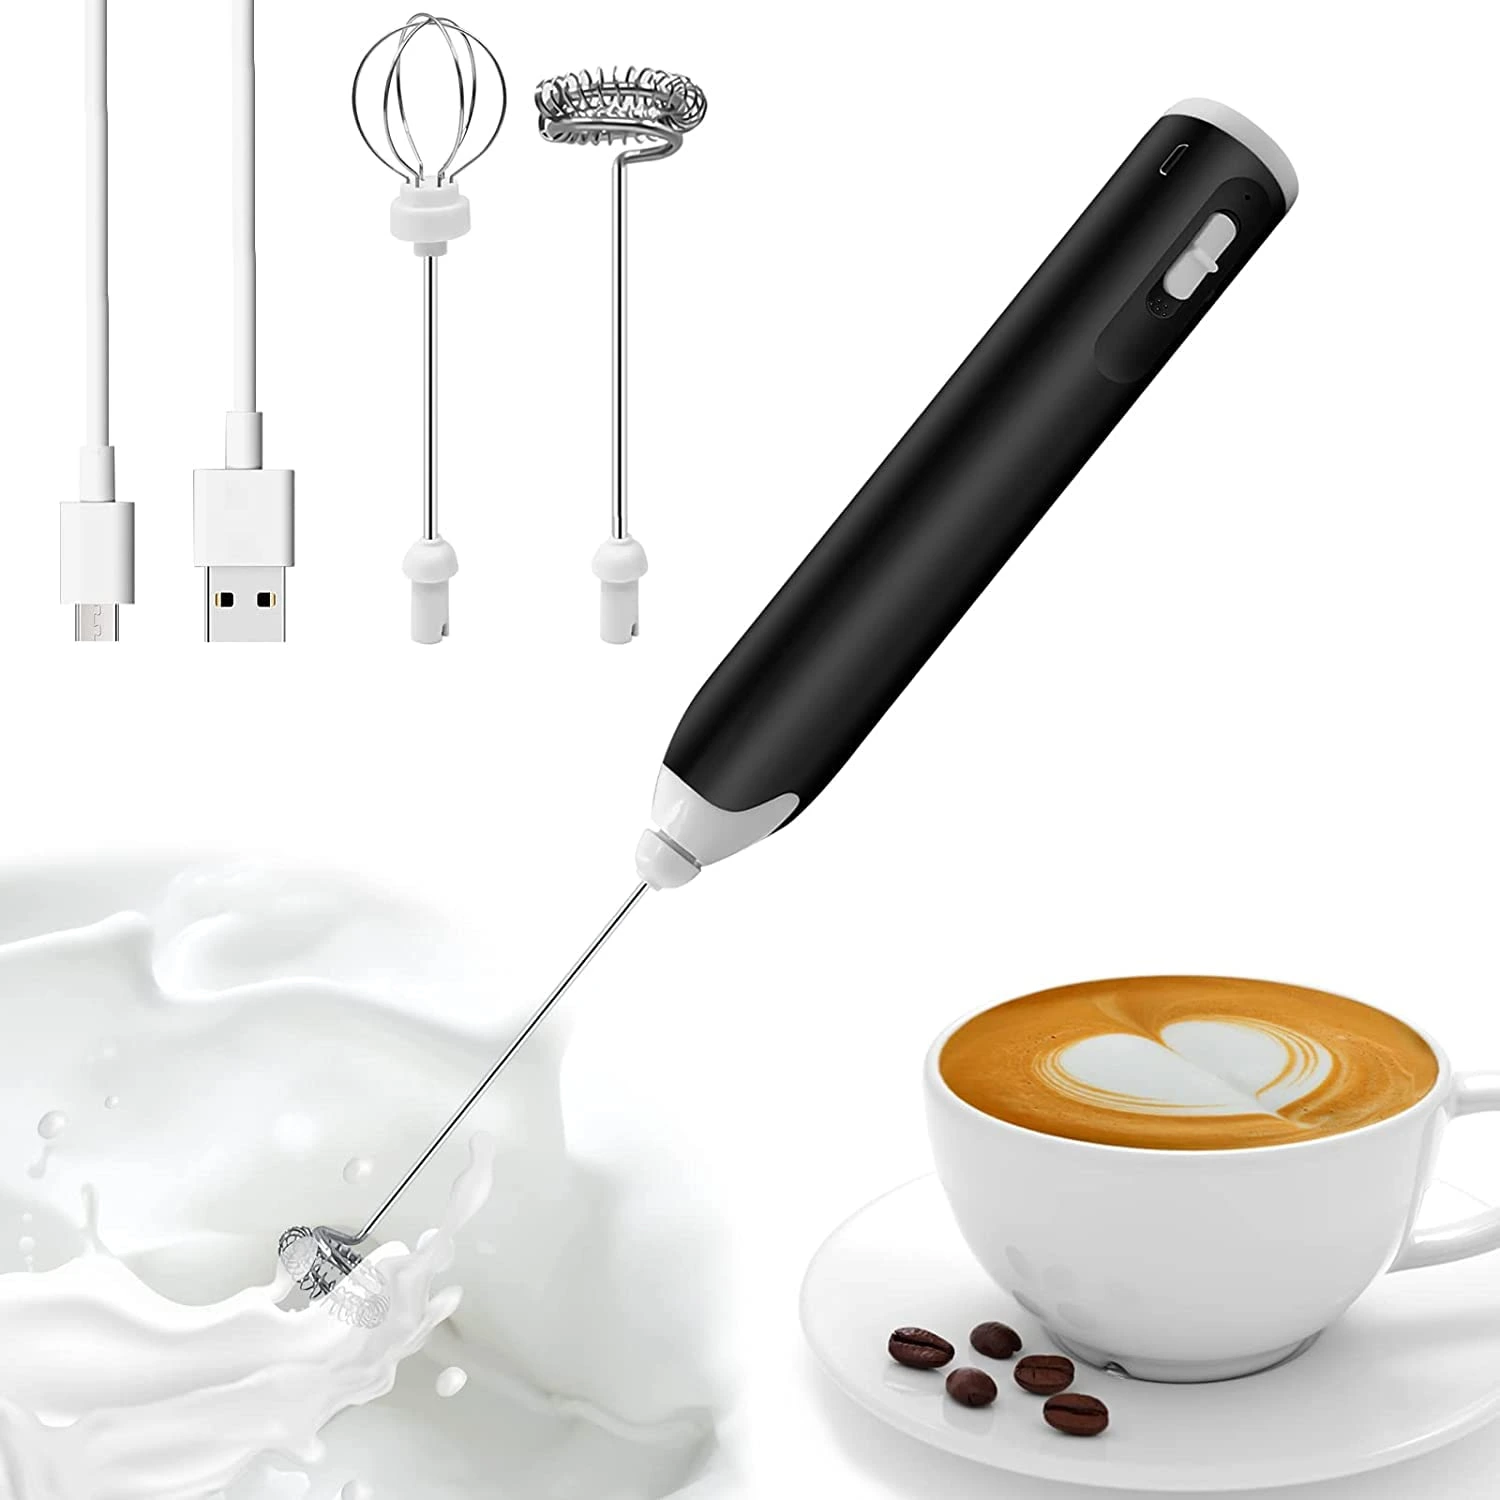 https://spiderjuice.in/wp-content/uploads/2023/08/SpiderJuice-USB-Rechargeable-Handheld-3-Speed-Adjustable-Electric-Milk-Foaming-Frother-with-2-Stainless-Steel-Whisks-Mixer-Head-for-Tea-Coffee-Eggs-Milkshake-Hot-Chocolate-Curd-etc-Pack-of-1.webp